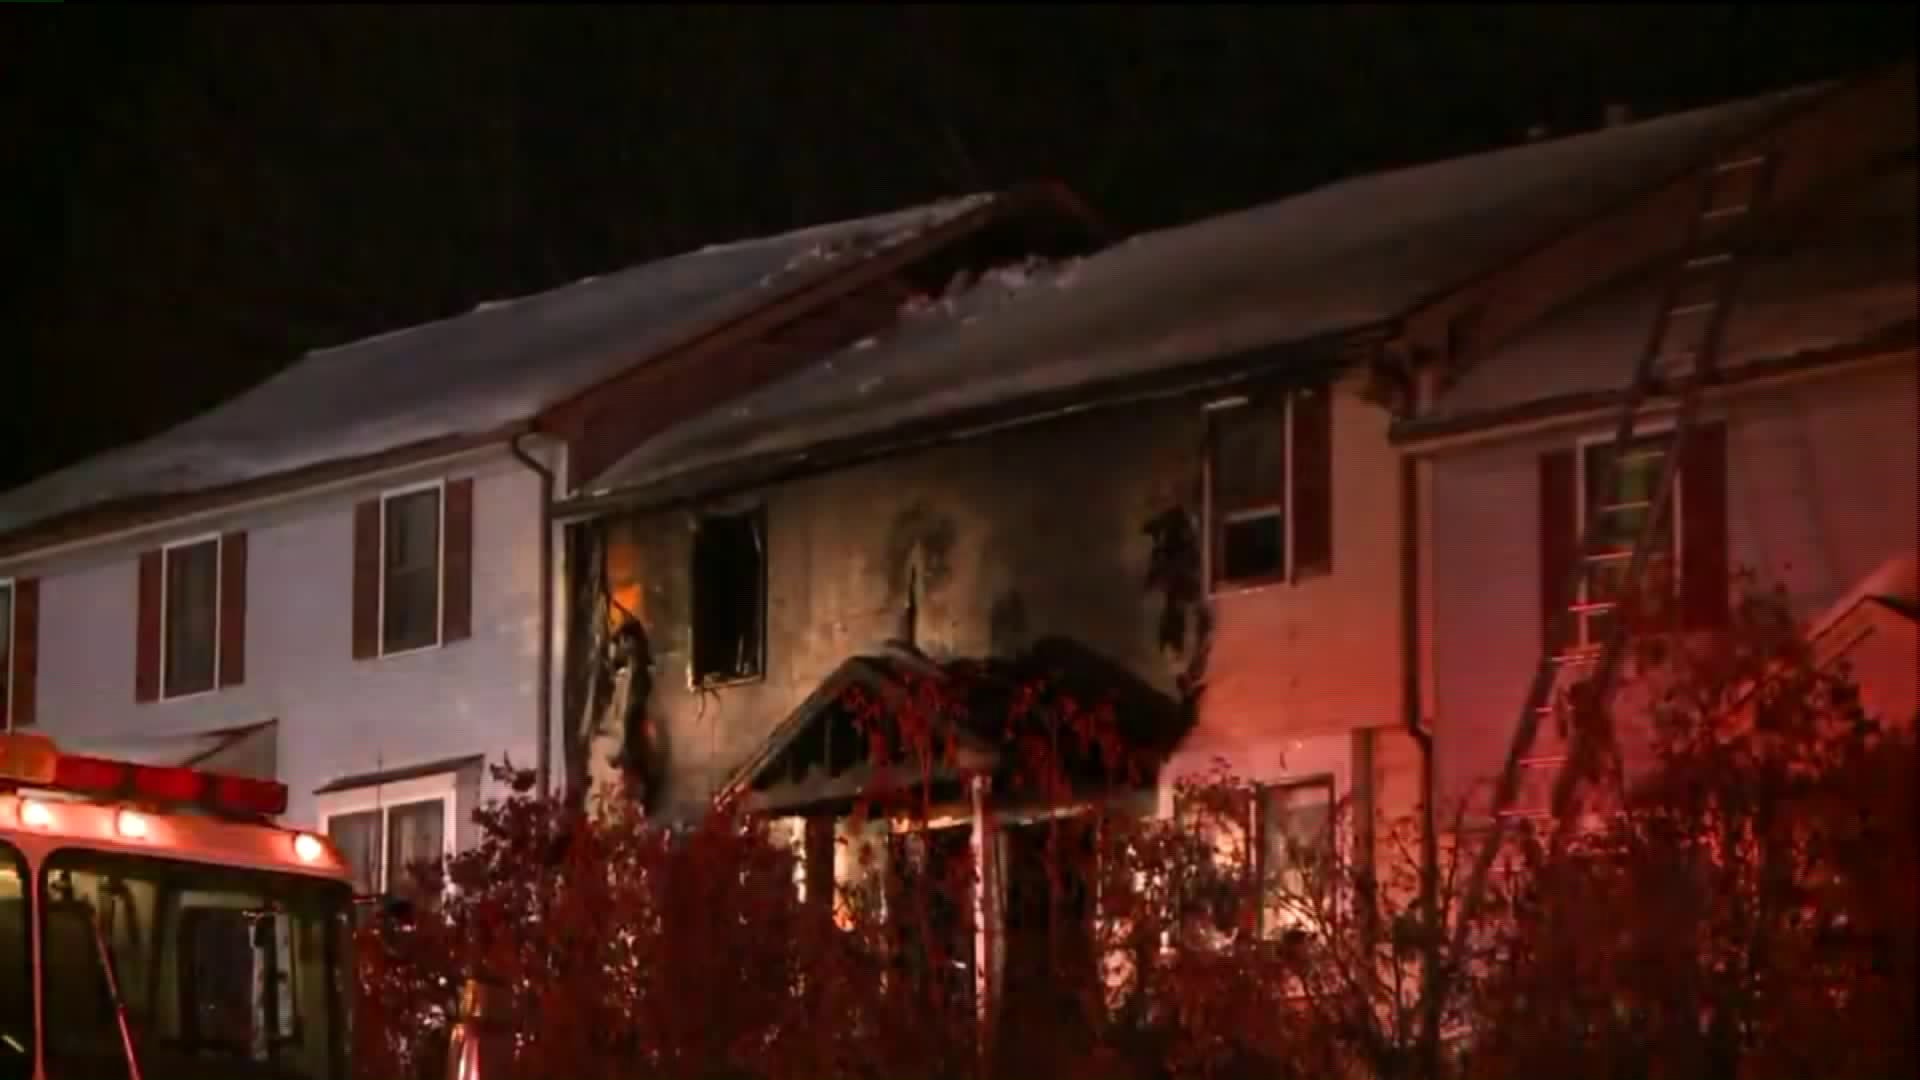 9 hospitalized, including children, after early morning fire in New Britain